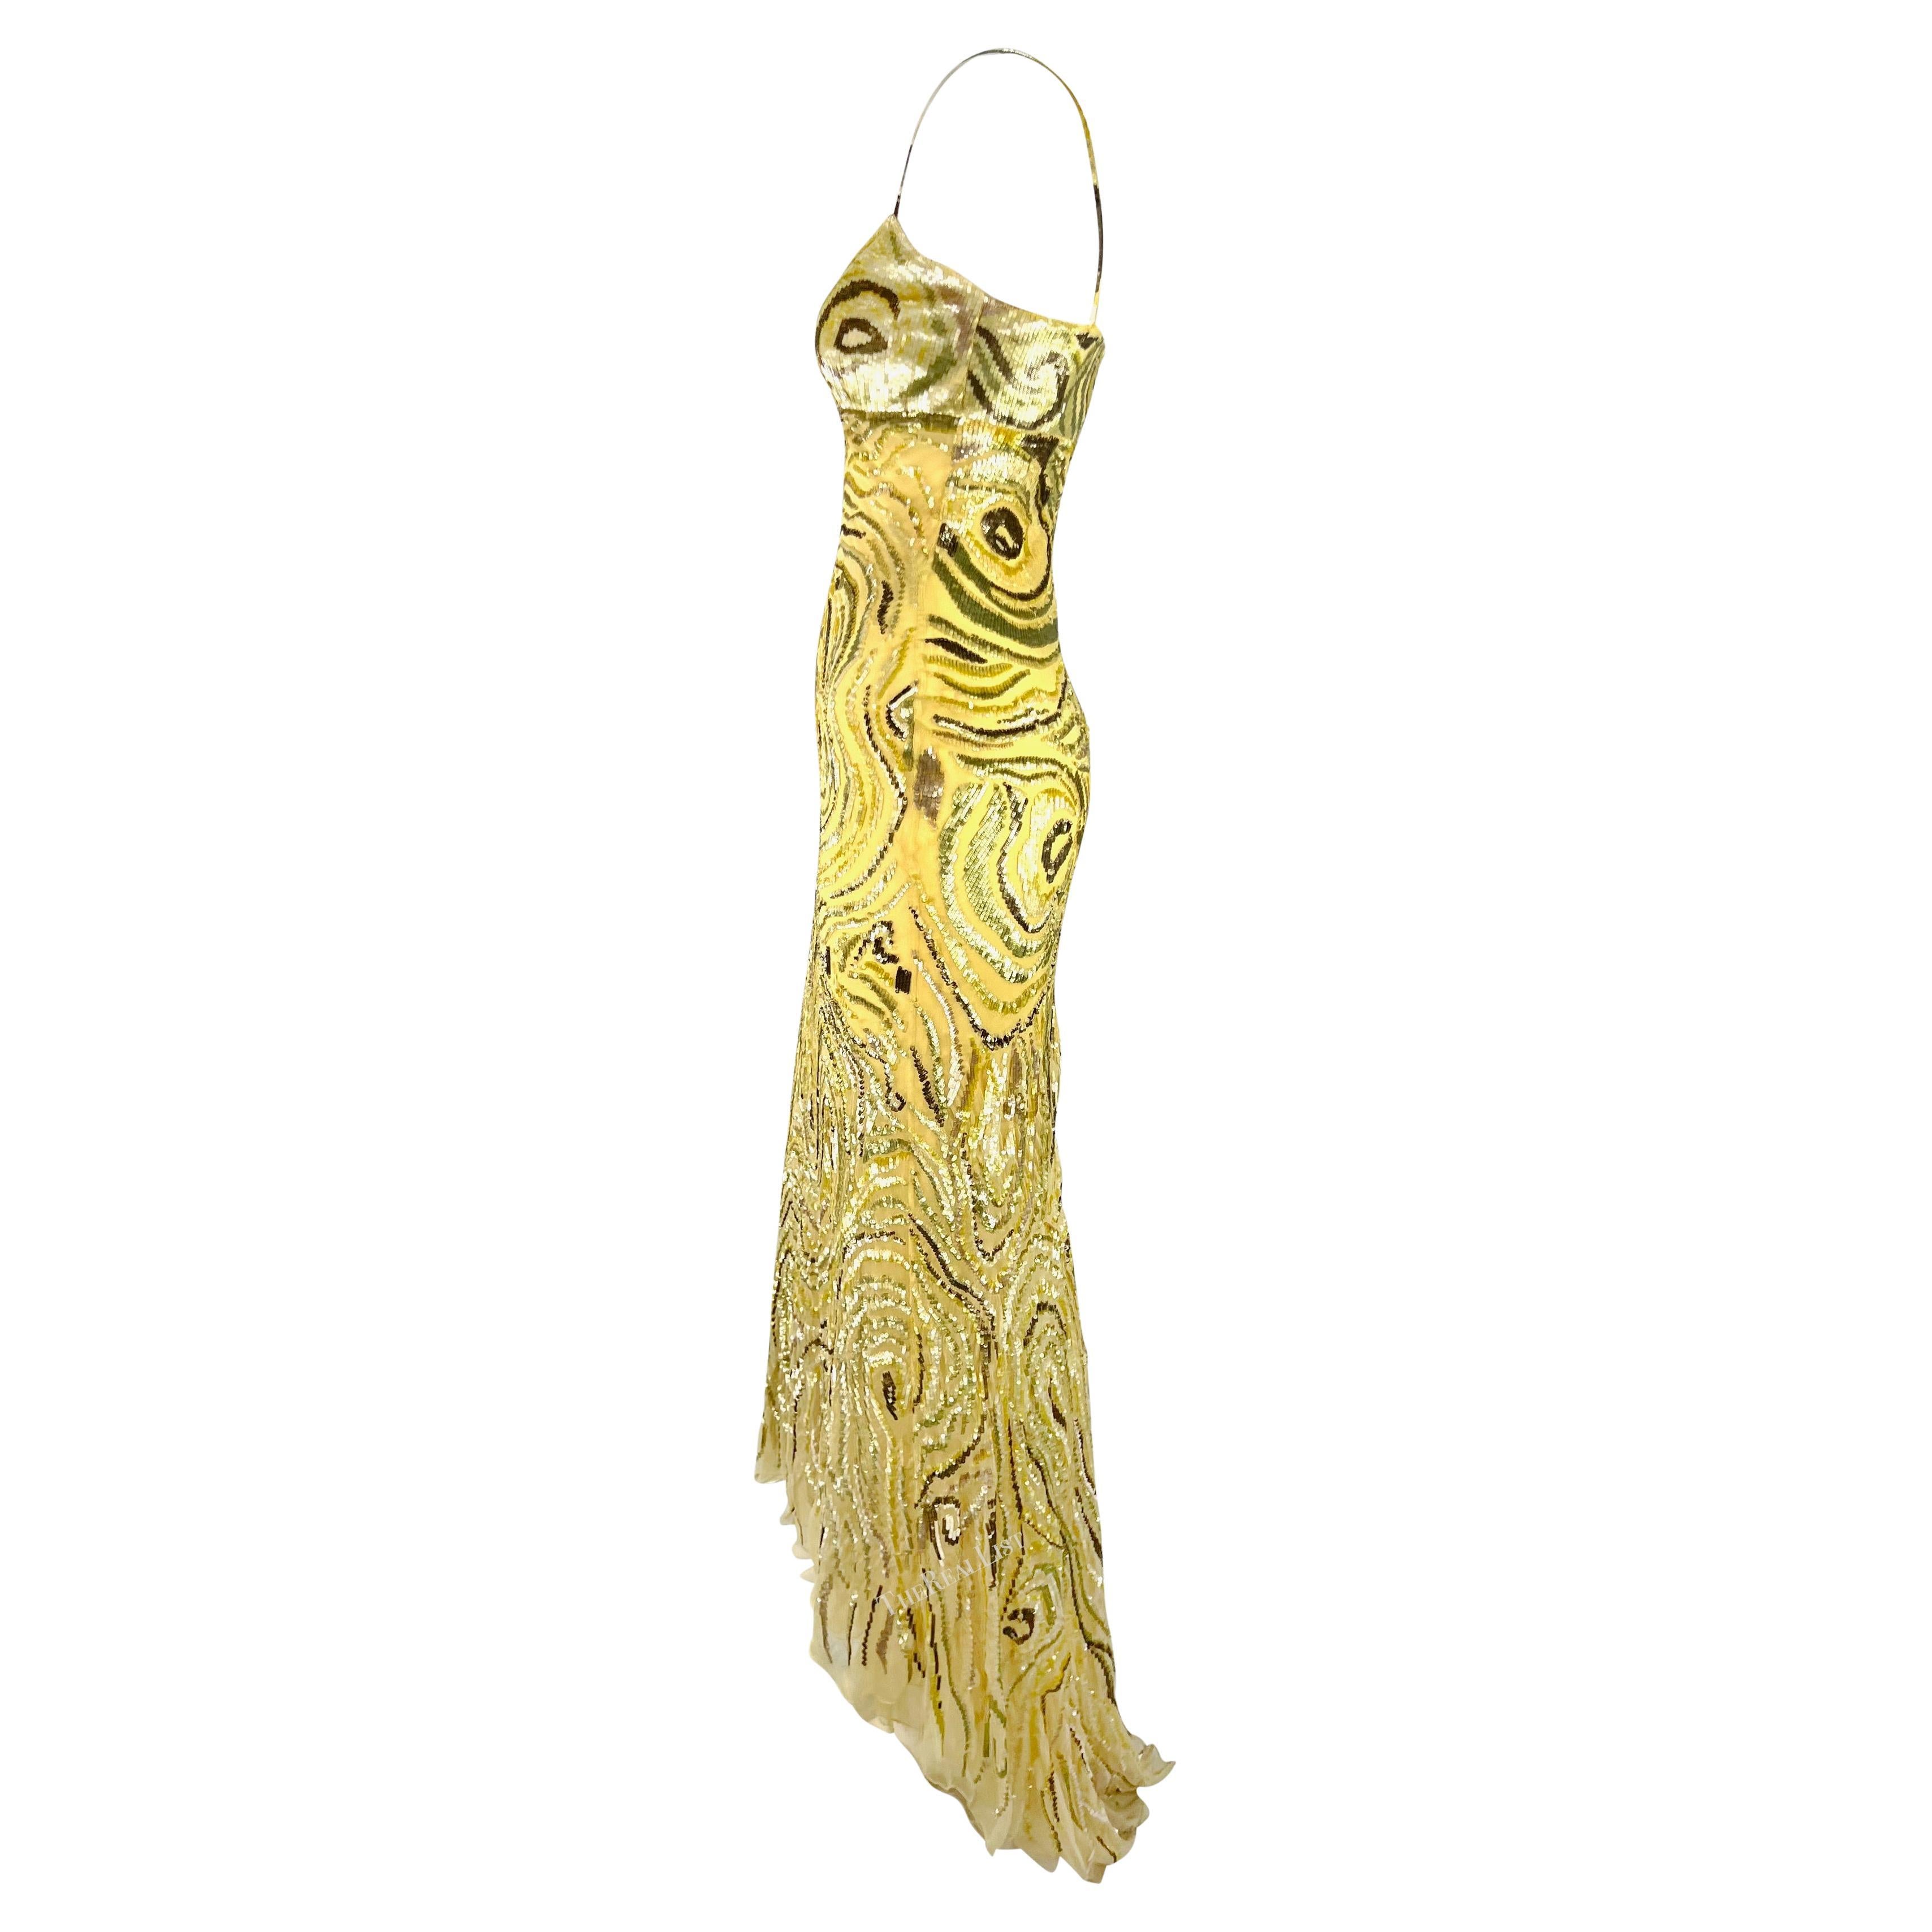 S/S 1997 Valentino Garavani Runway Naomi Abstract Organic Form Sequin Gown For Sale 12